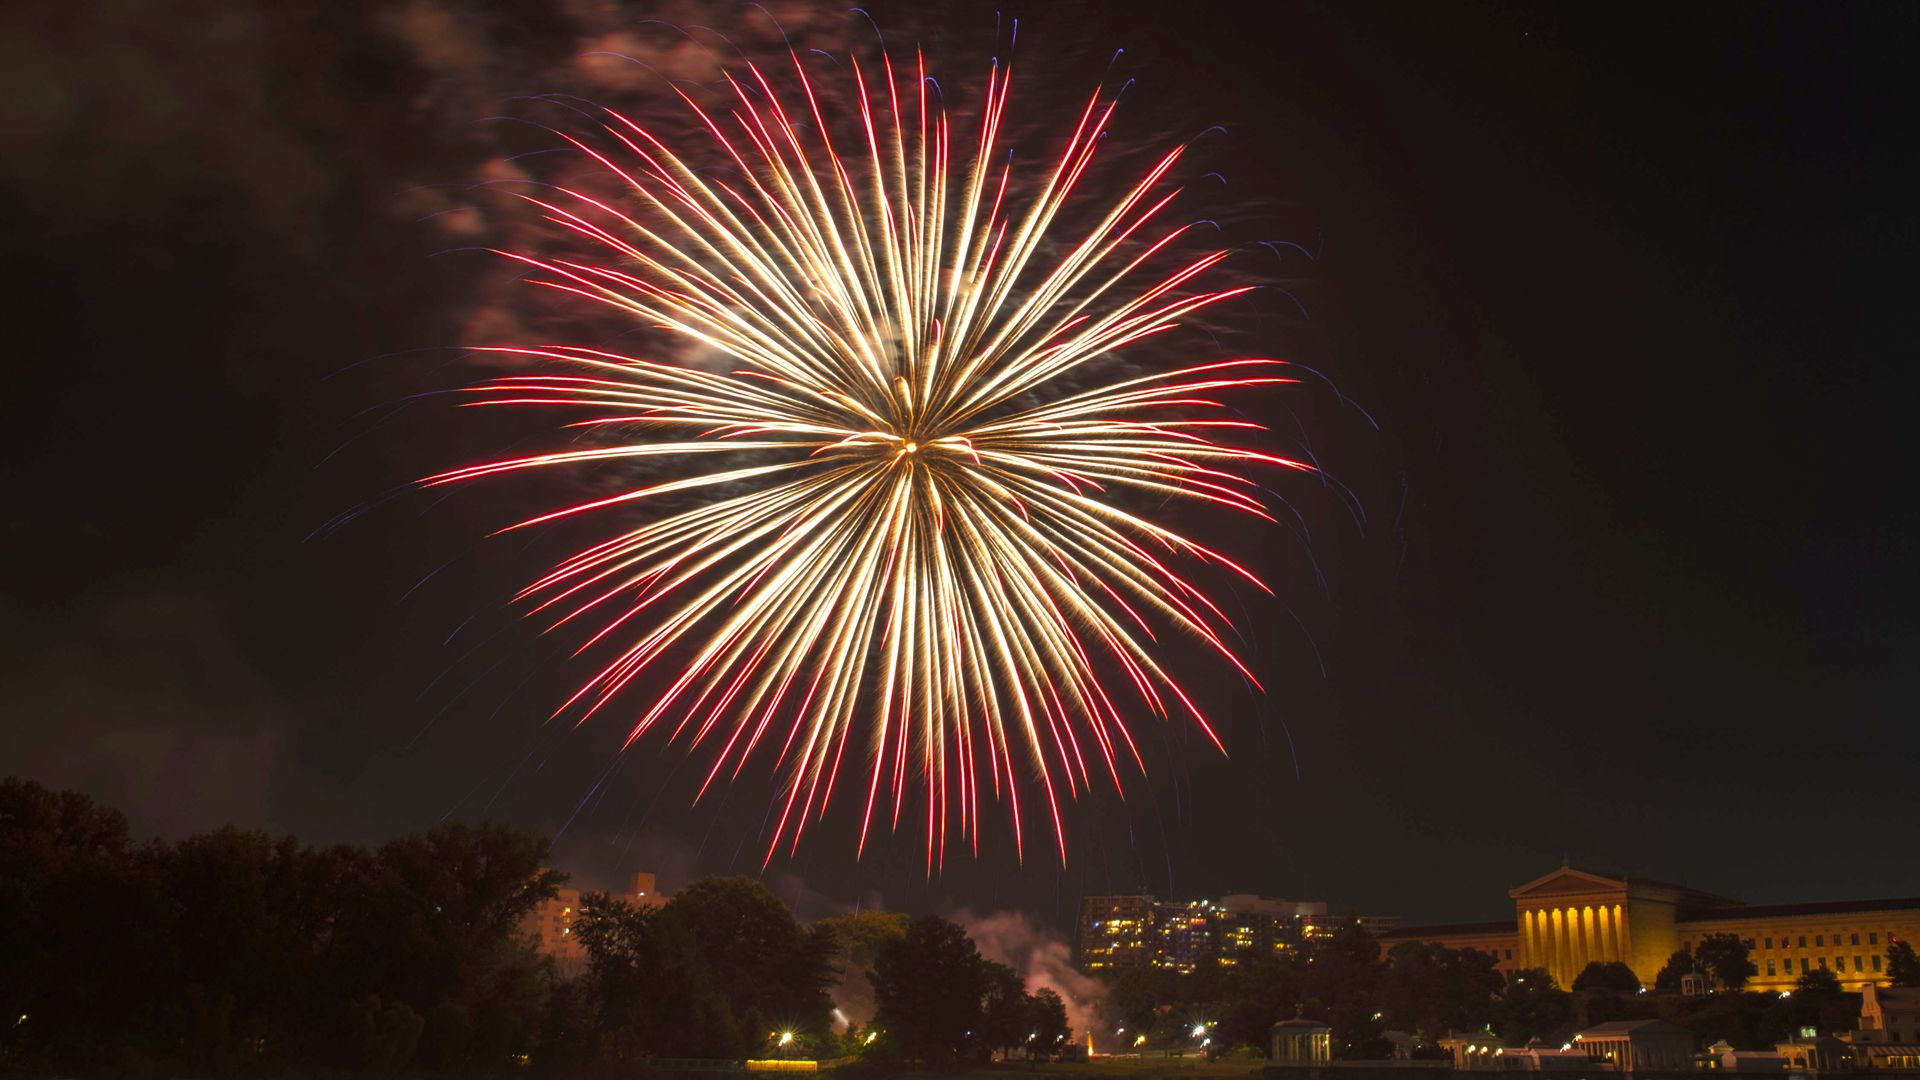 A photo of large red fireworks erupting over the Philadelphia Art Museum on July 4, 2021.